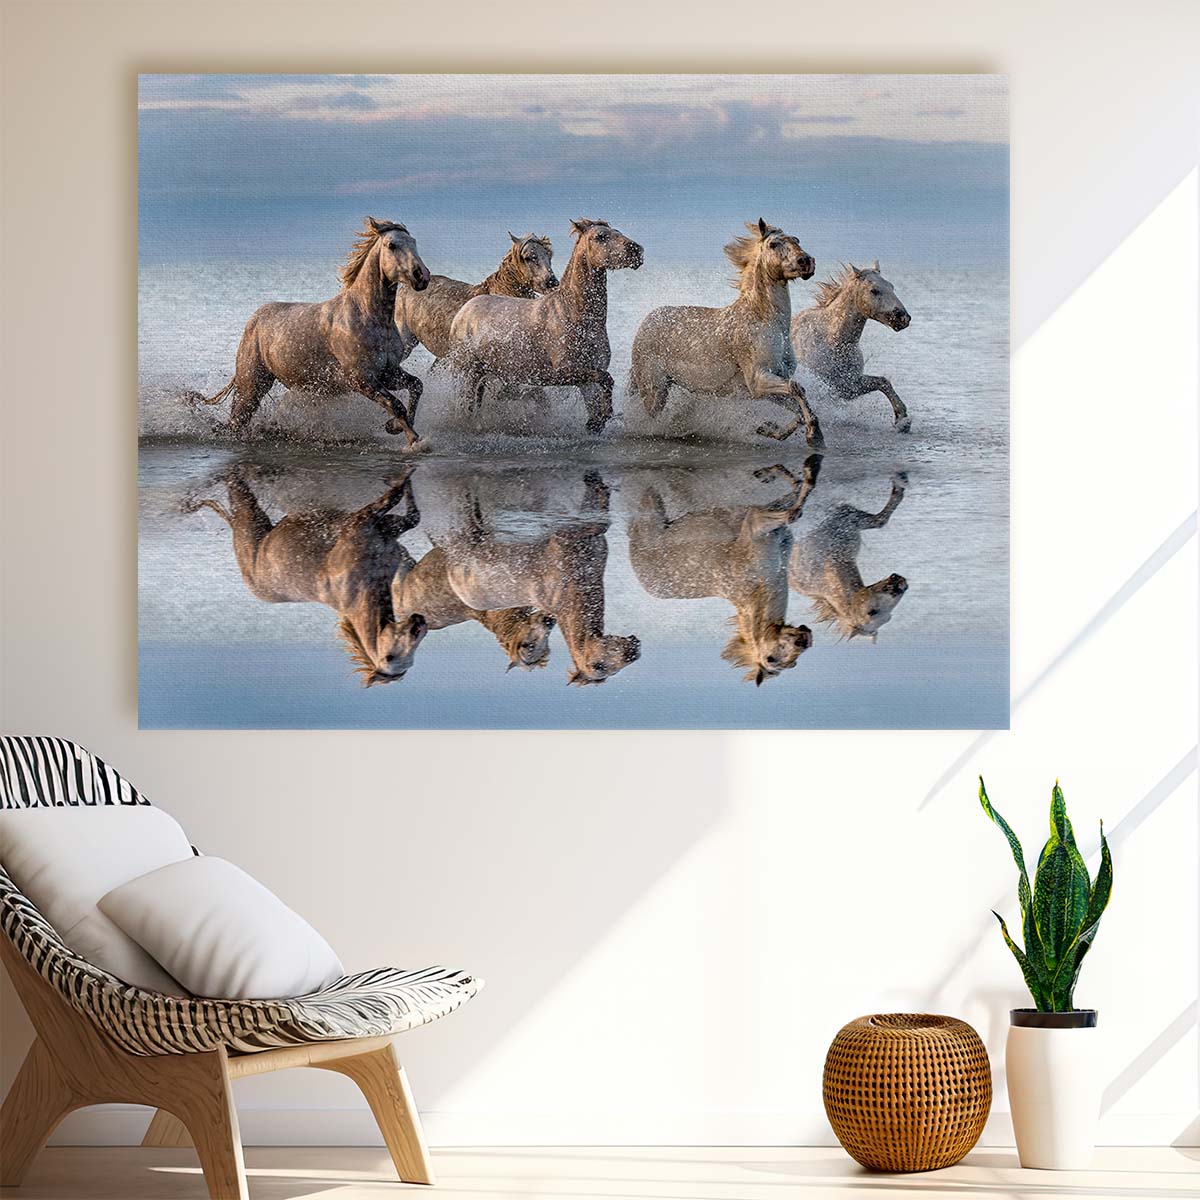 Camargue Wild Horses in Motion Wall Art by Luxuriance Designs. Made in USA.